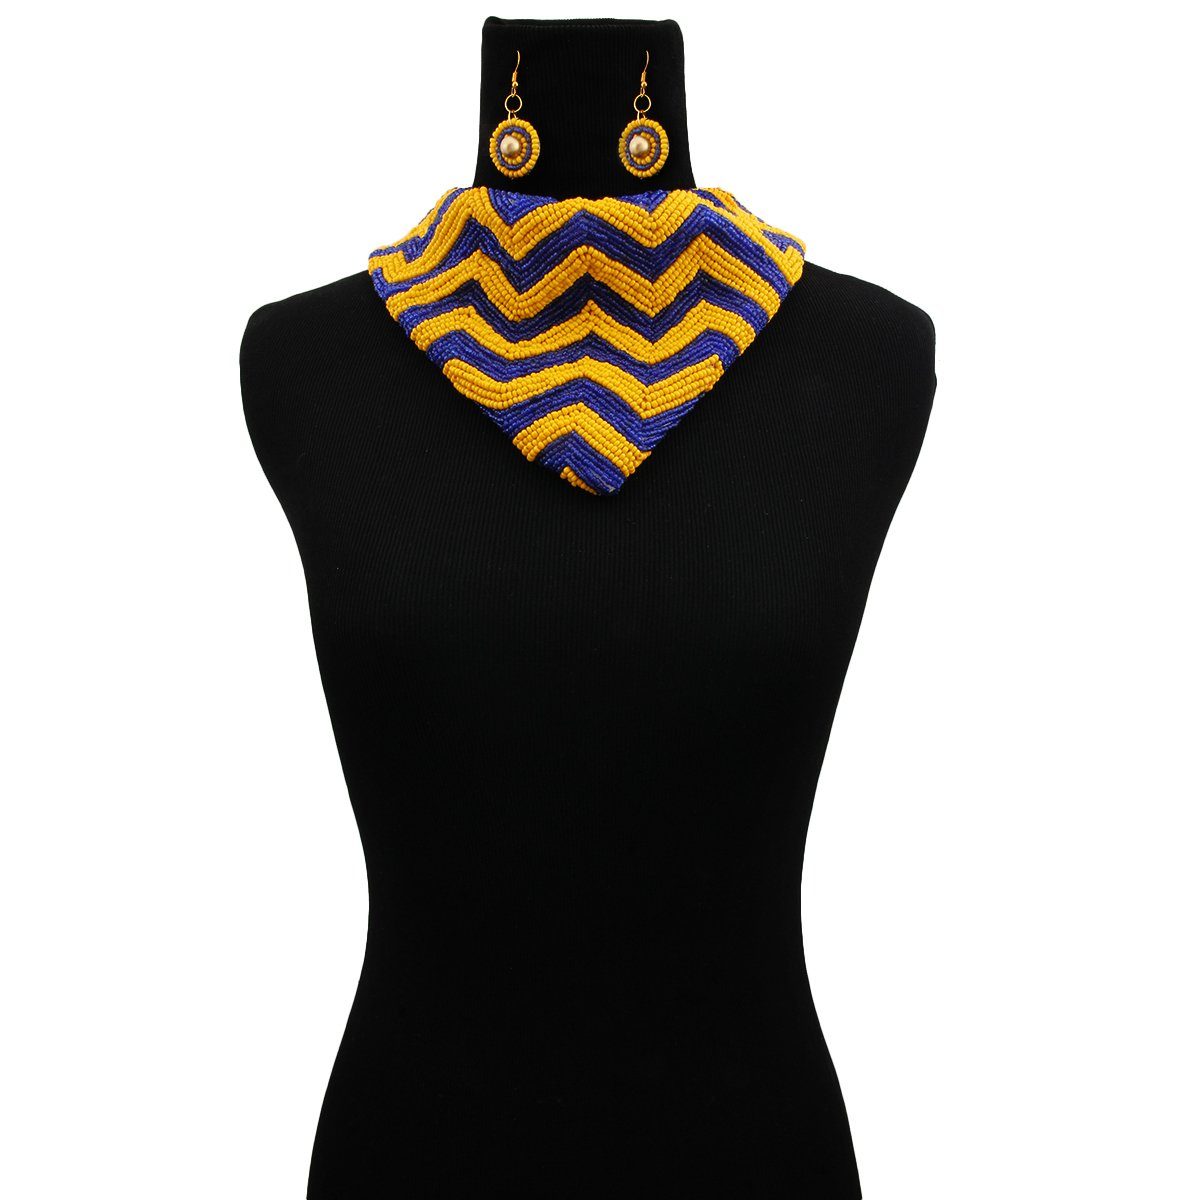 Handmade Embroidered Scarf Necklace Set with Chevron Pattern Yellow and Blue Beads